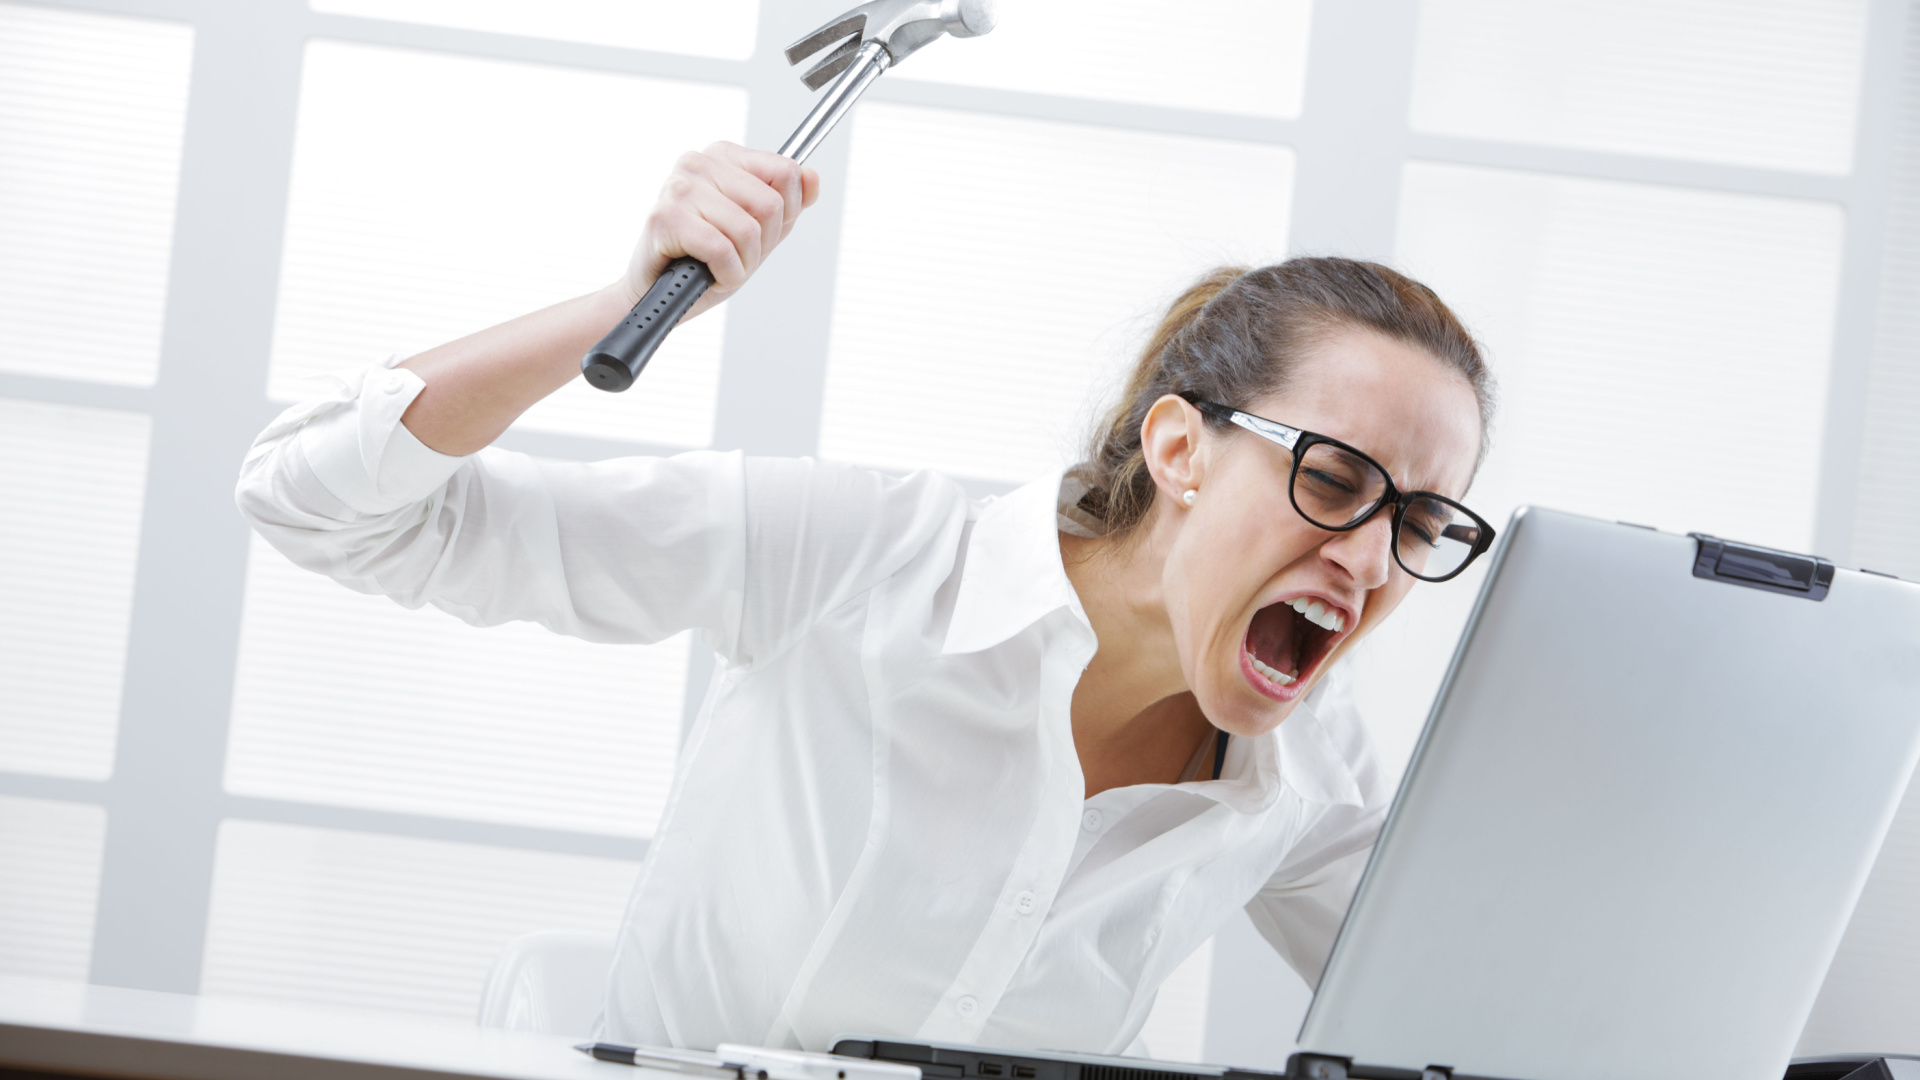 Angry woman with PC holding hammer